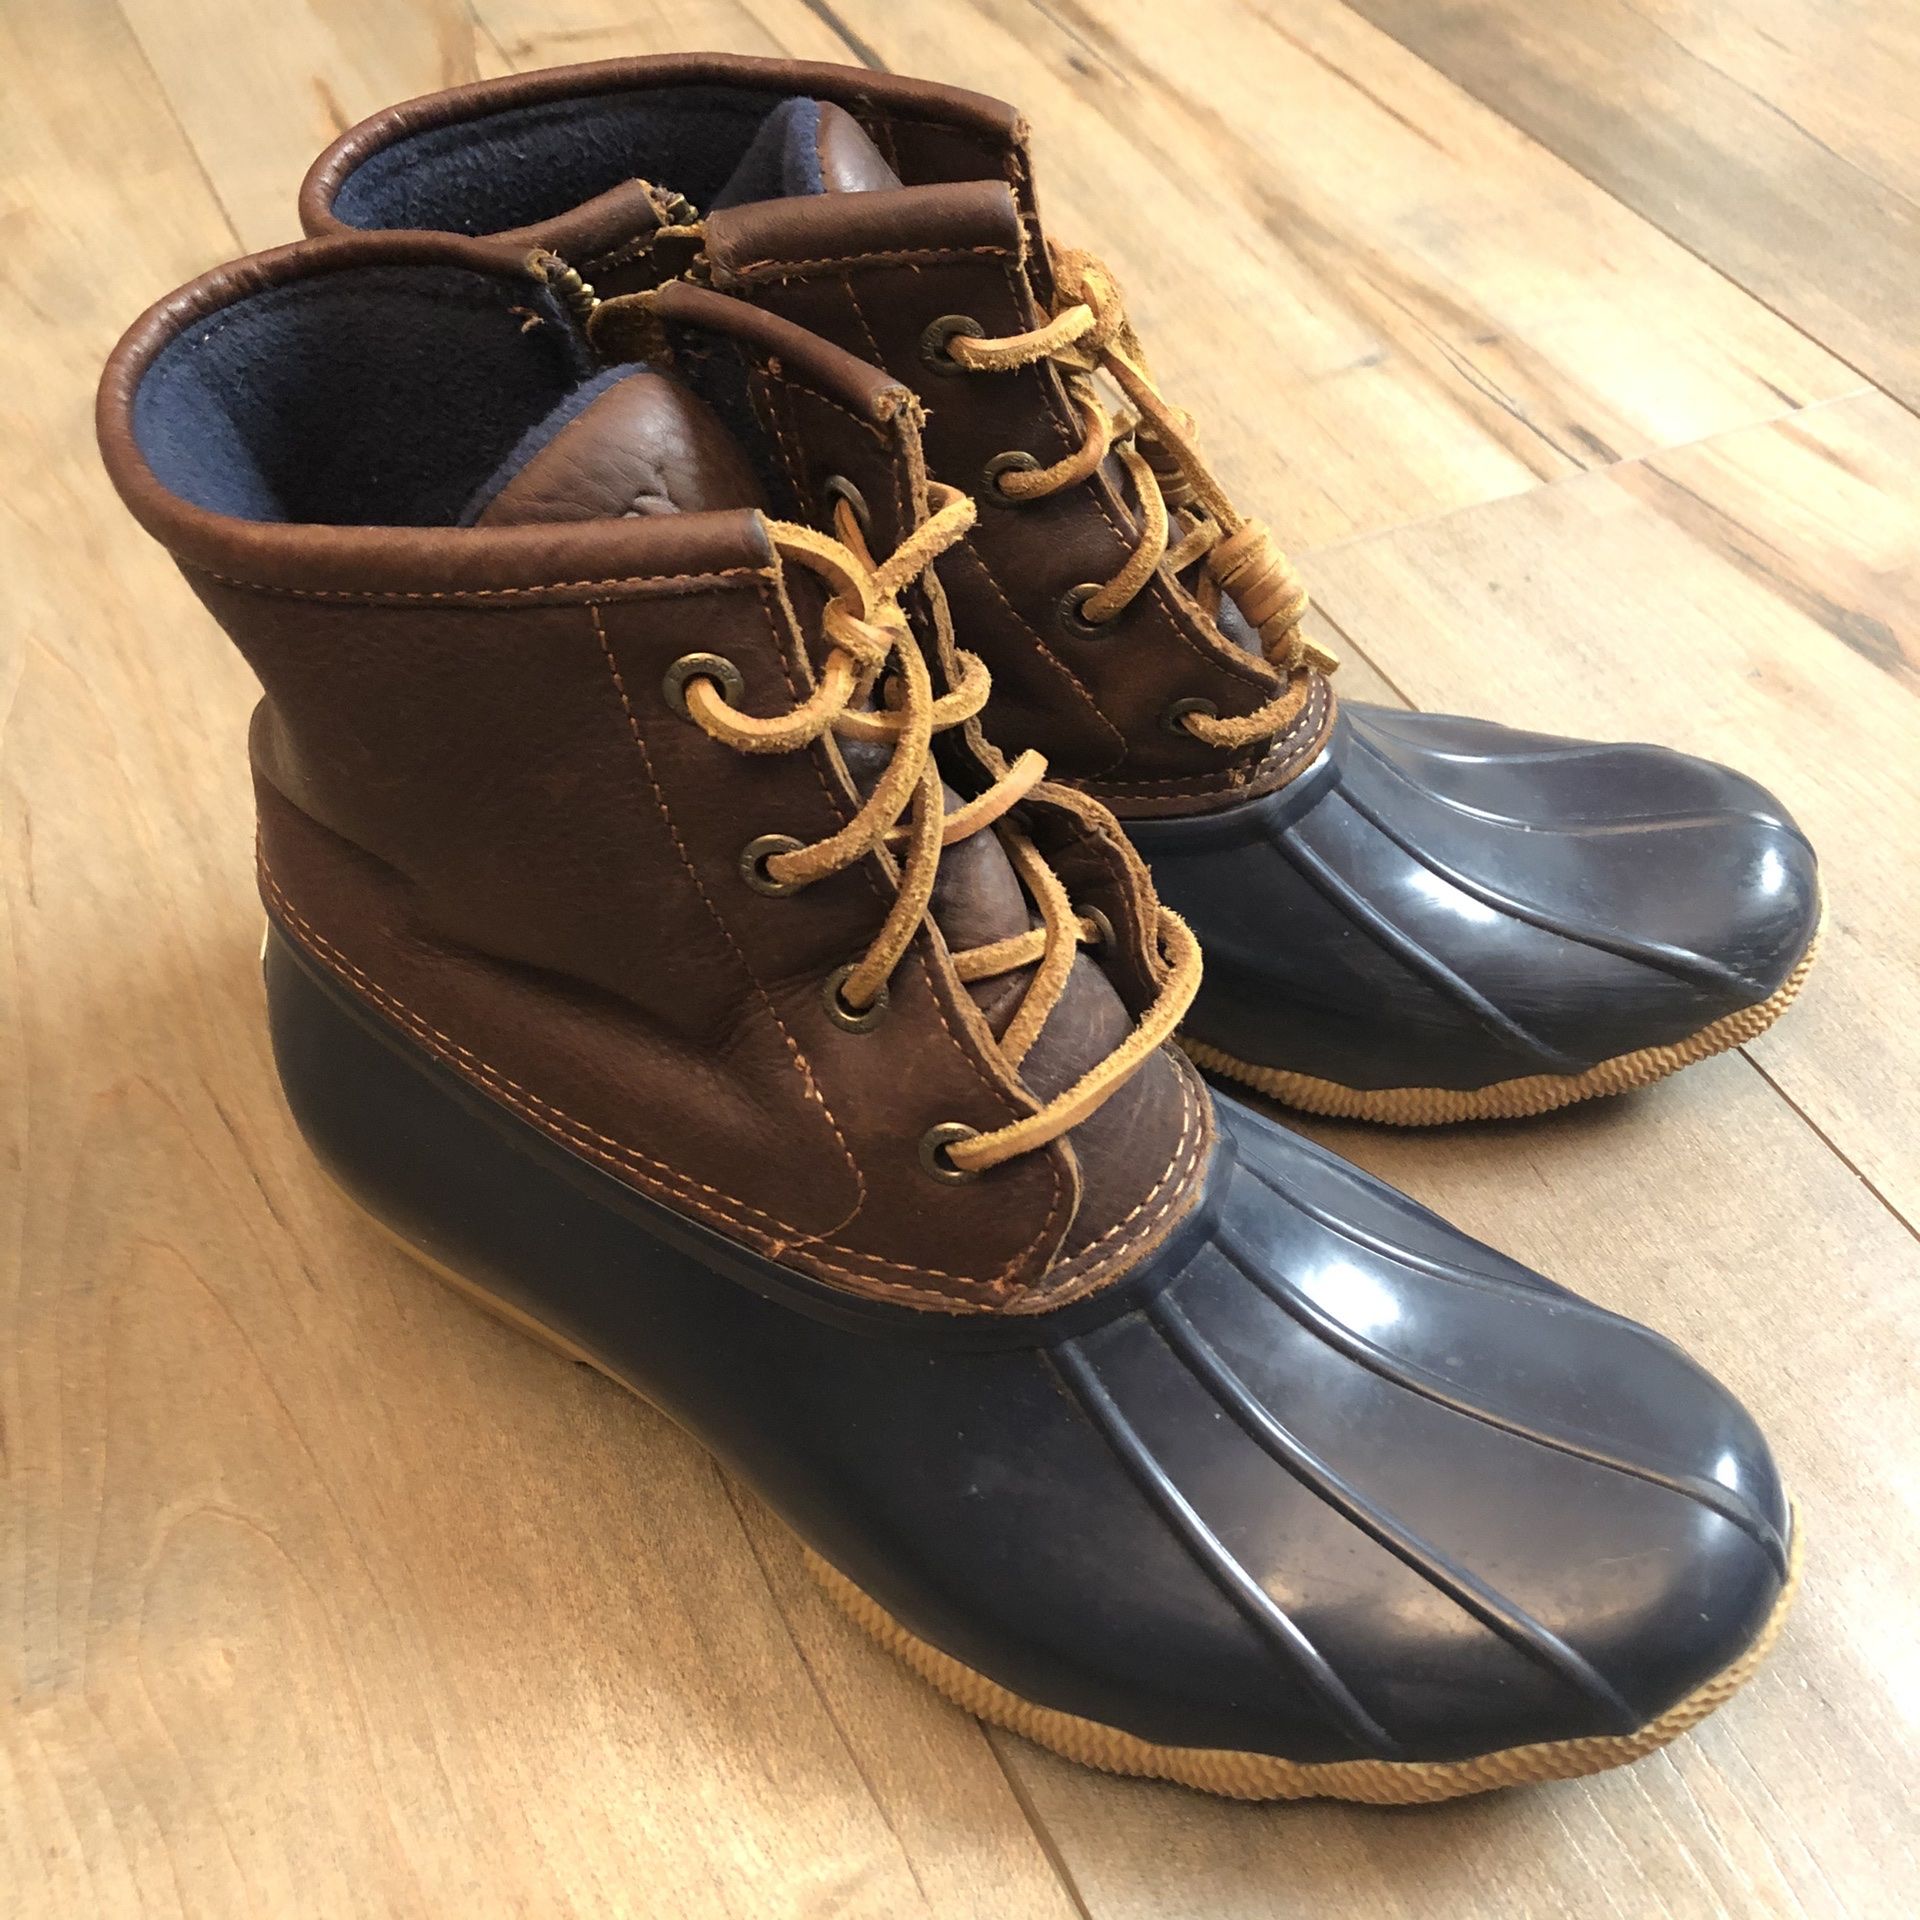 Sperry Saltwater Duck Boots Leather Women’s 7.5